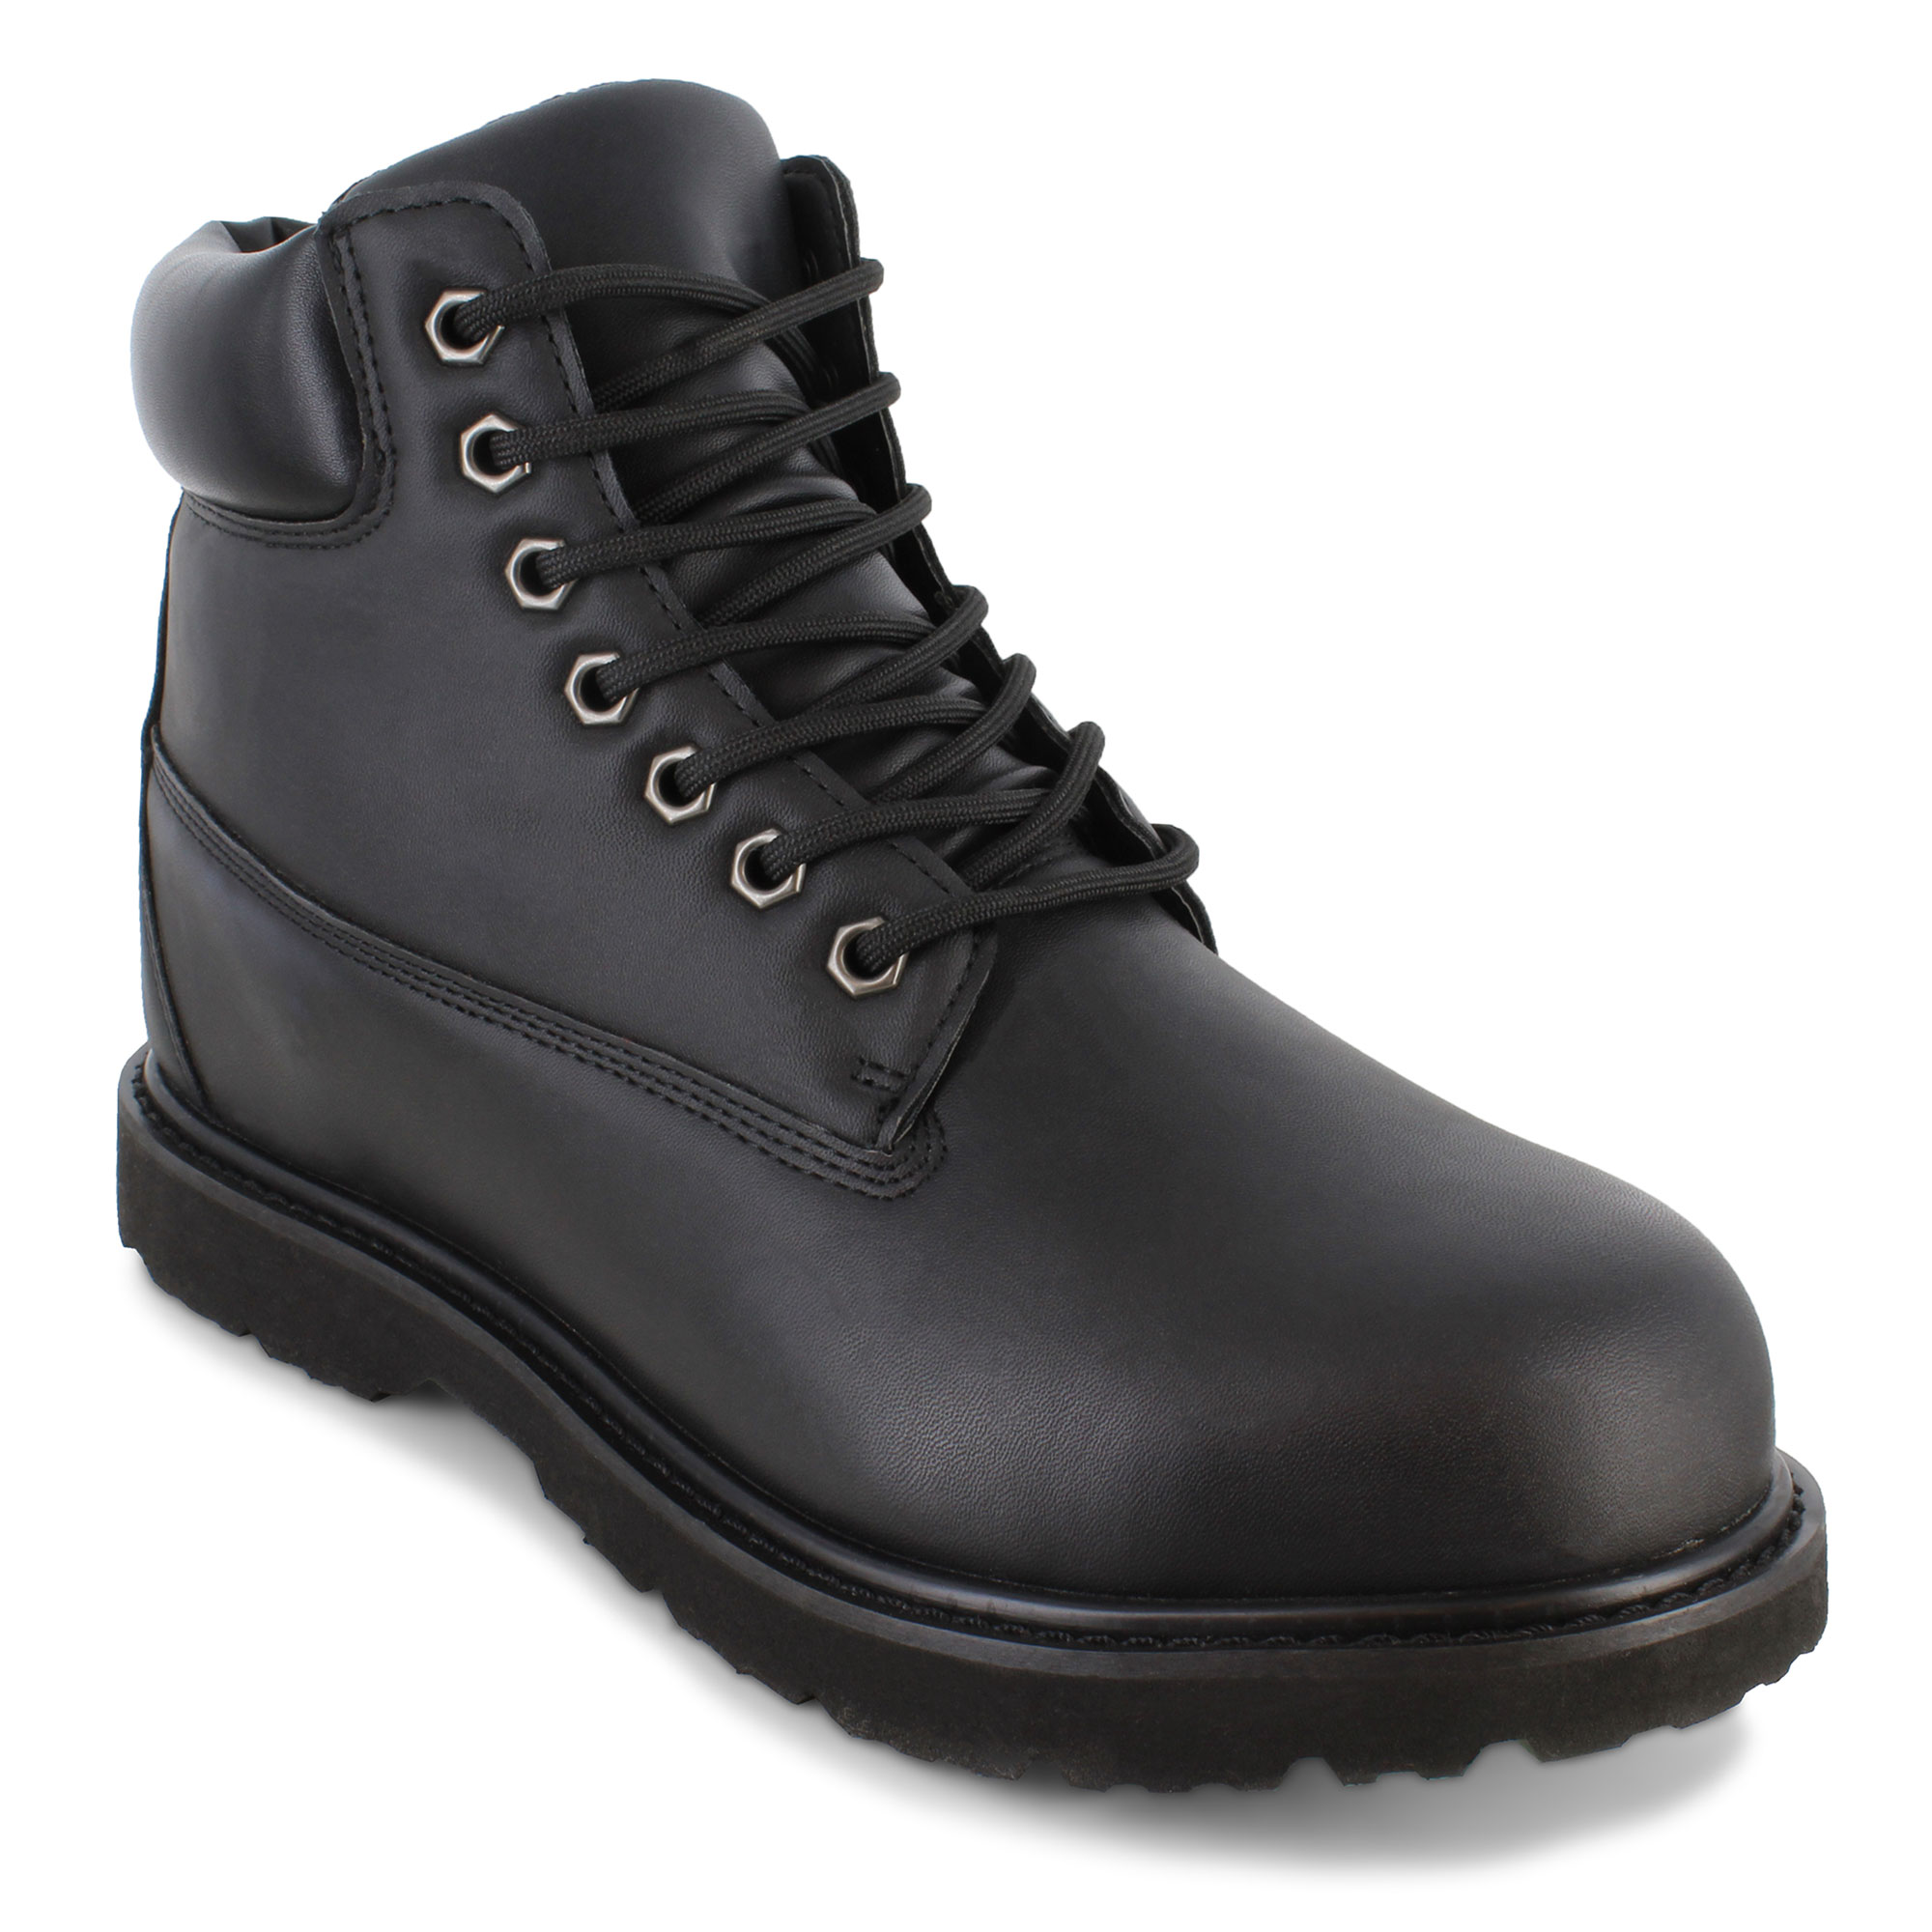 outbound trading co boots